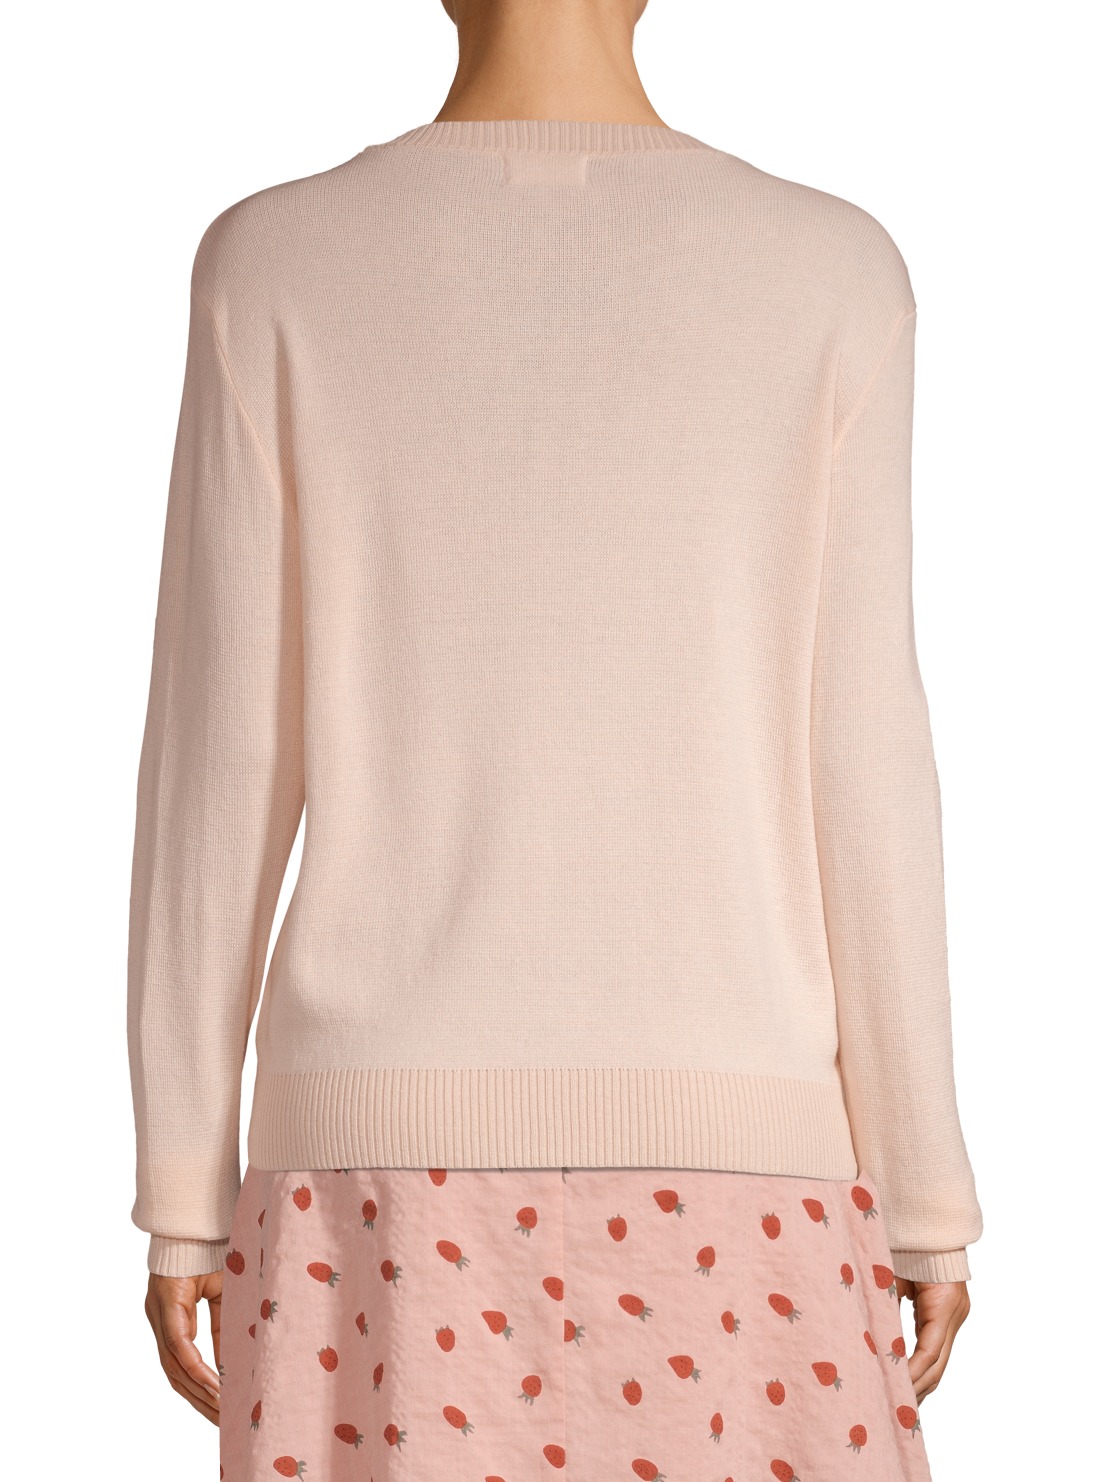 Love Sadie Women's Embroidered Sweater - image 5 of 7